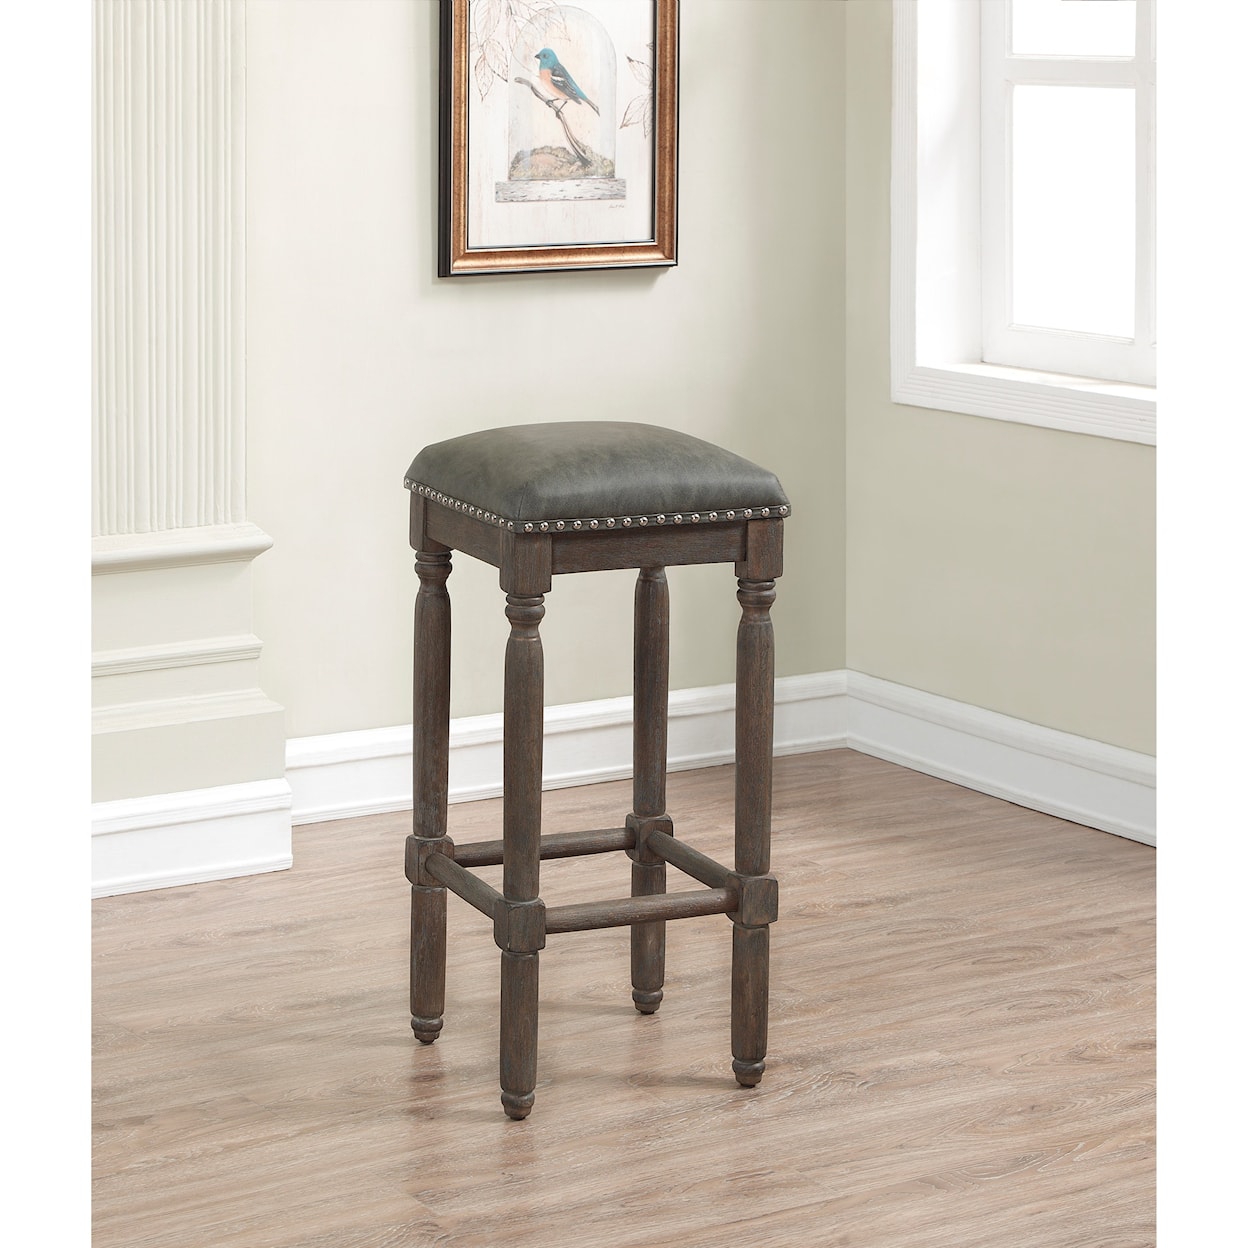 American Woodcrafters Wood Frame Barstools Bar Stool